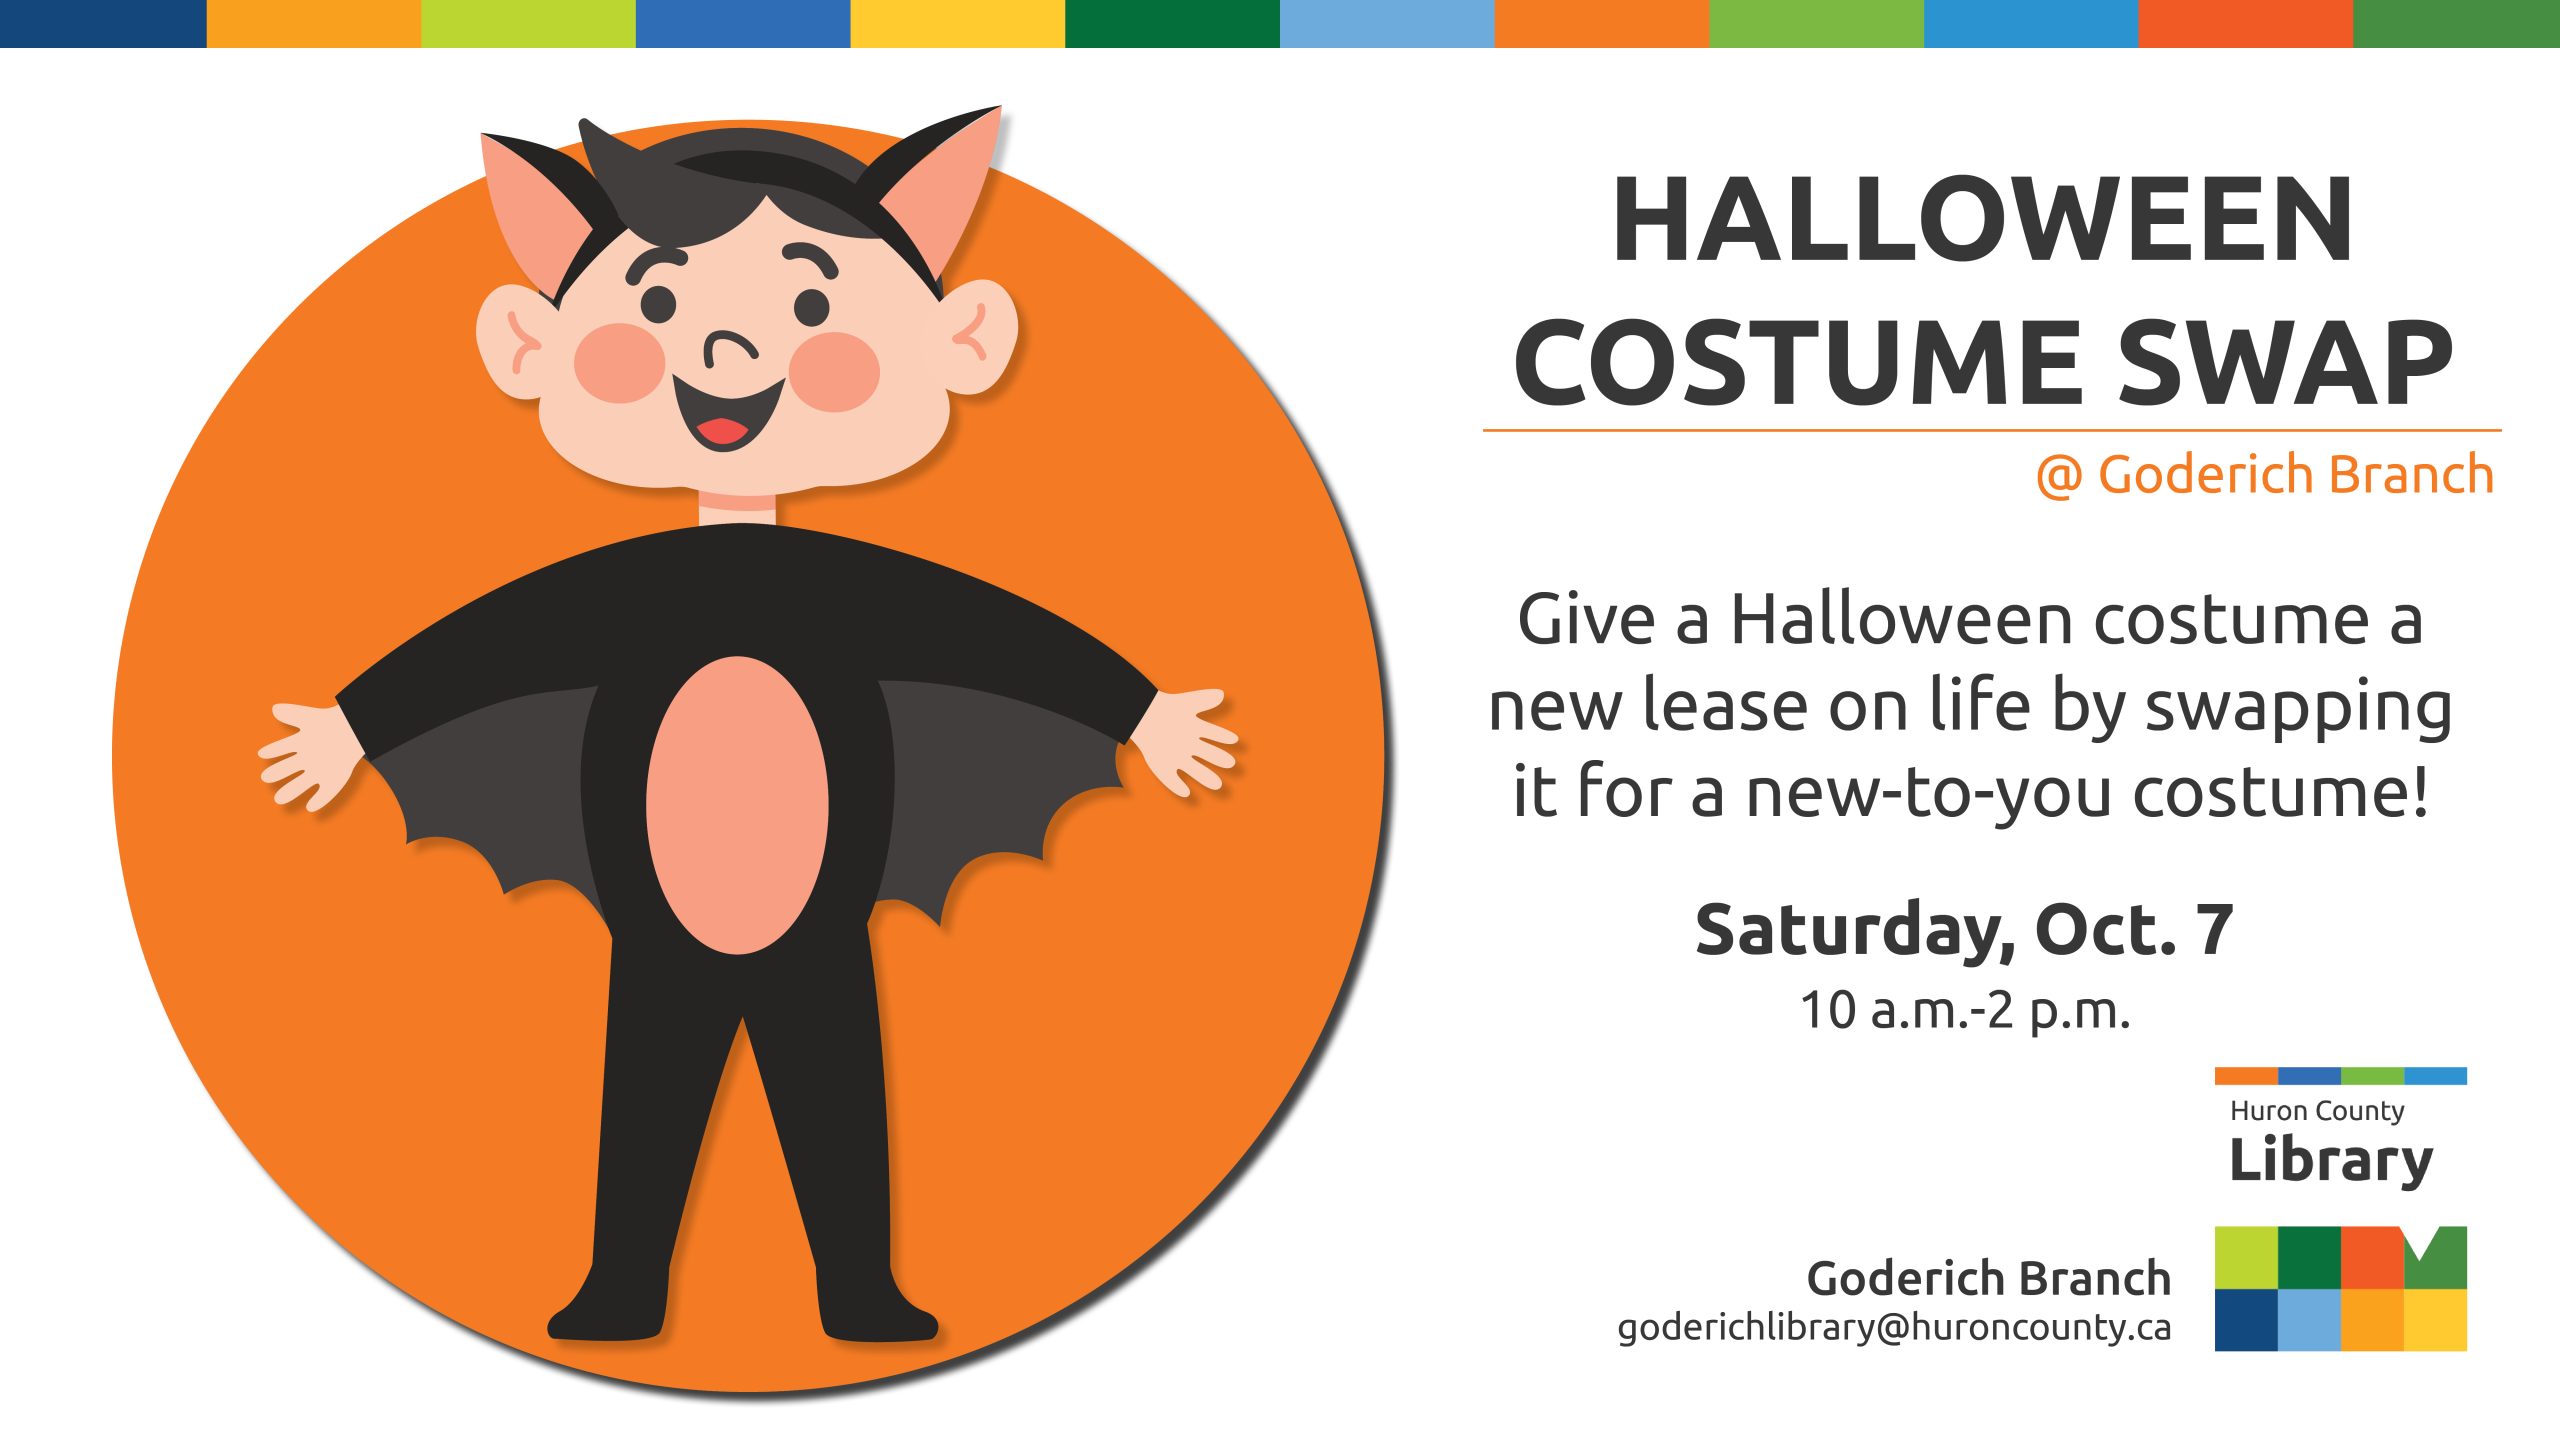 Illustration of a child in a bat costume with text promoting Halloween Costume Swap at Goderich Branch